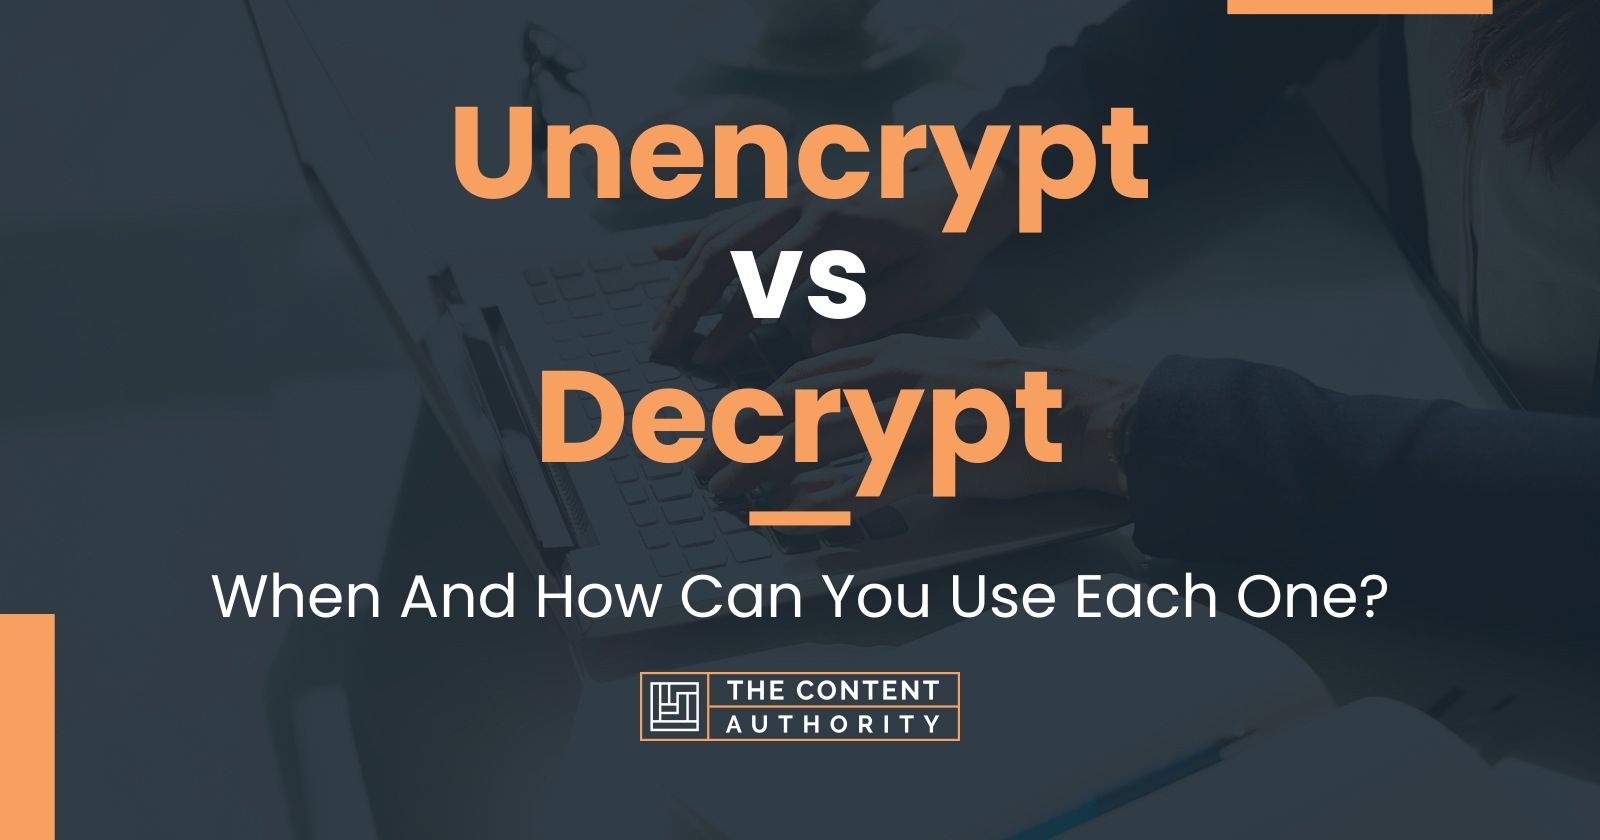 Unencrypt vs Decrypt: When And How Can You Use Each One?